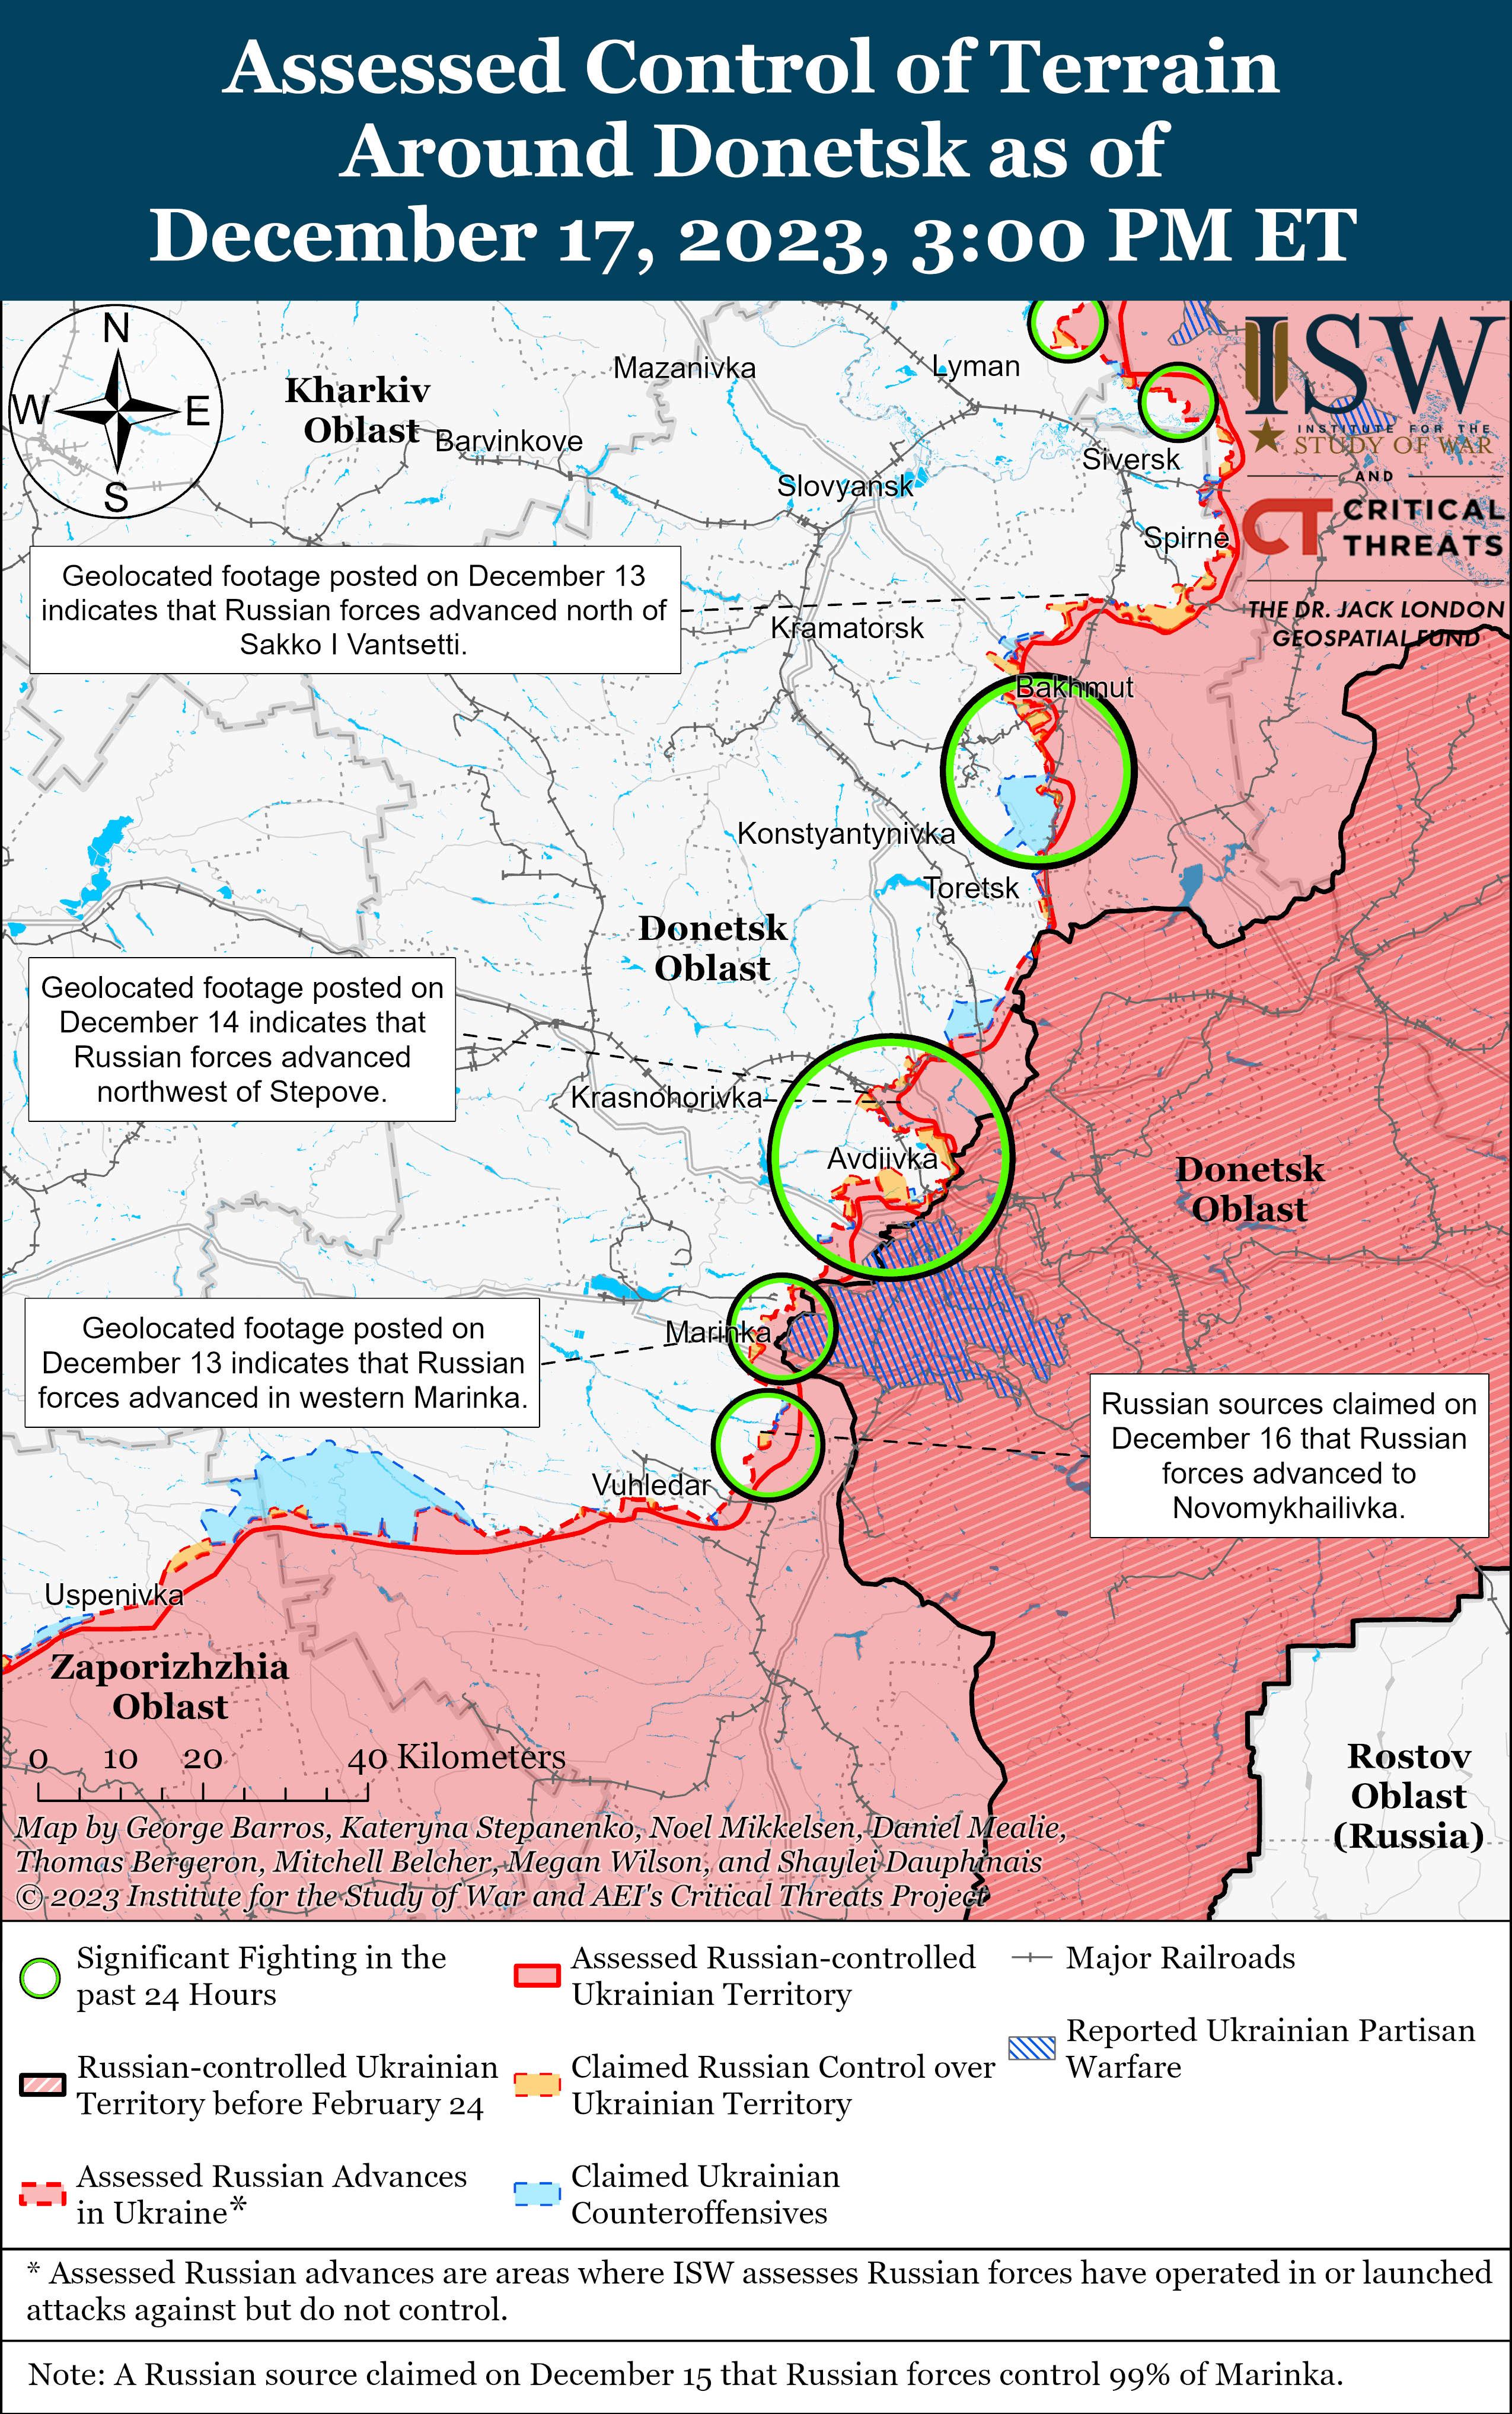 Russian Offensive Campaign Assessment, August 11, 2023